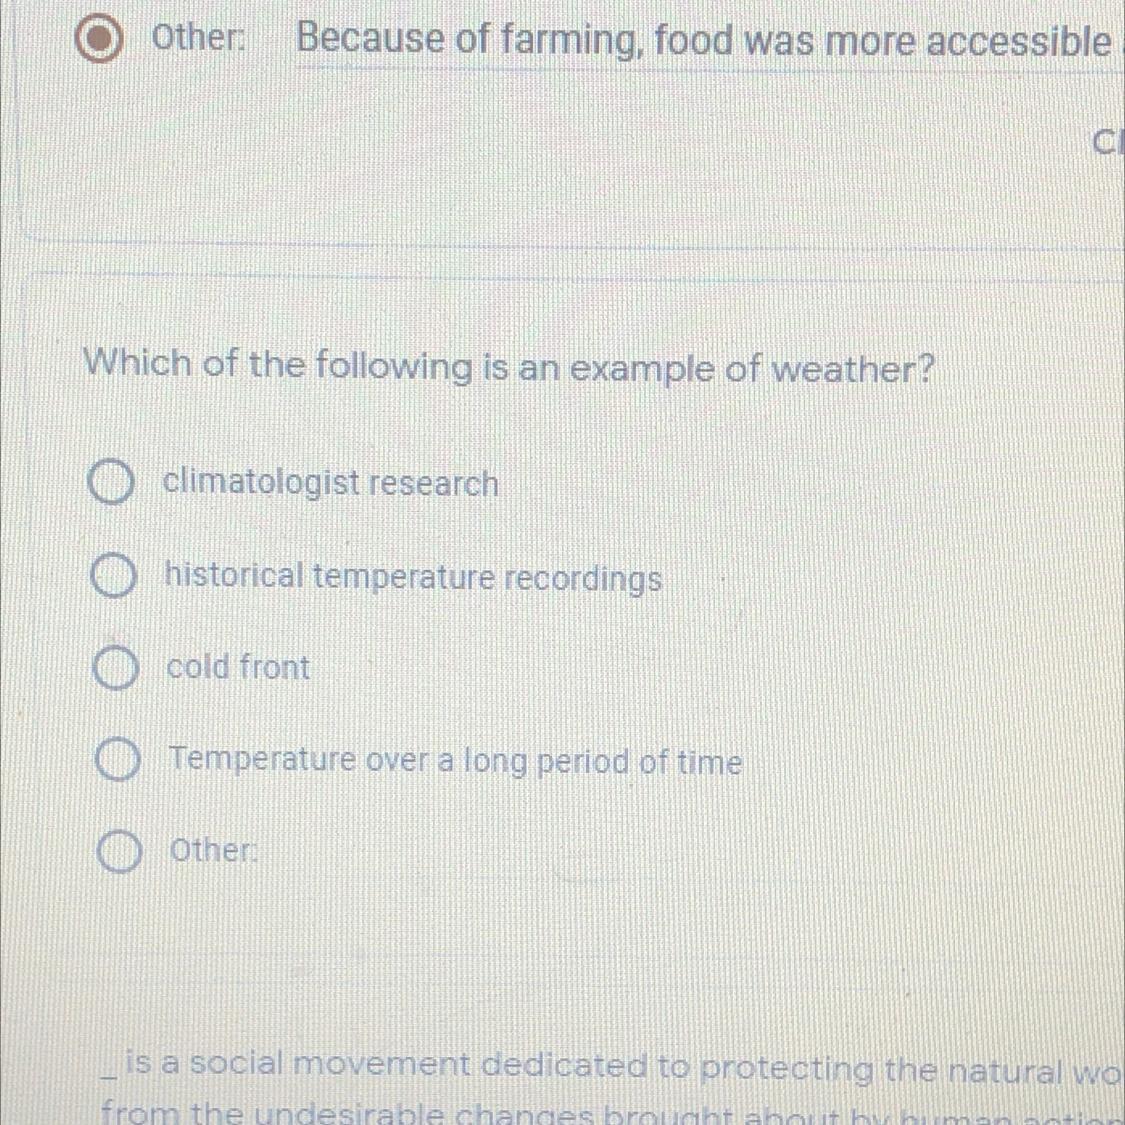 I Need Help On This 1 Question.